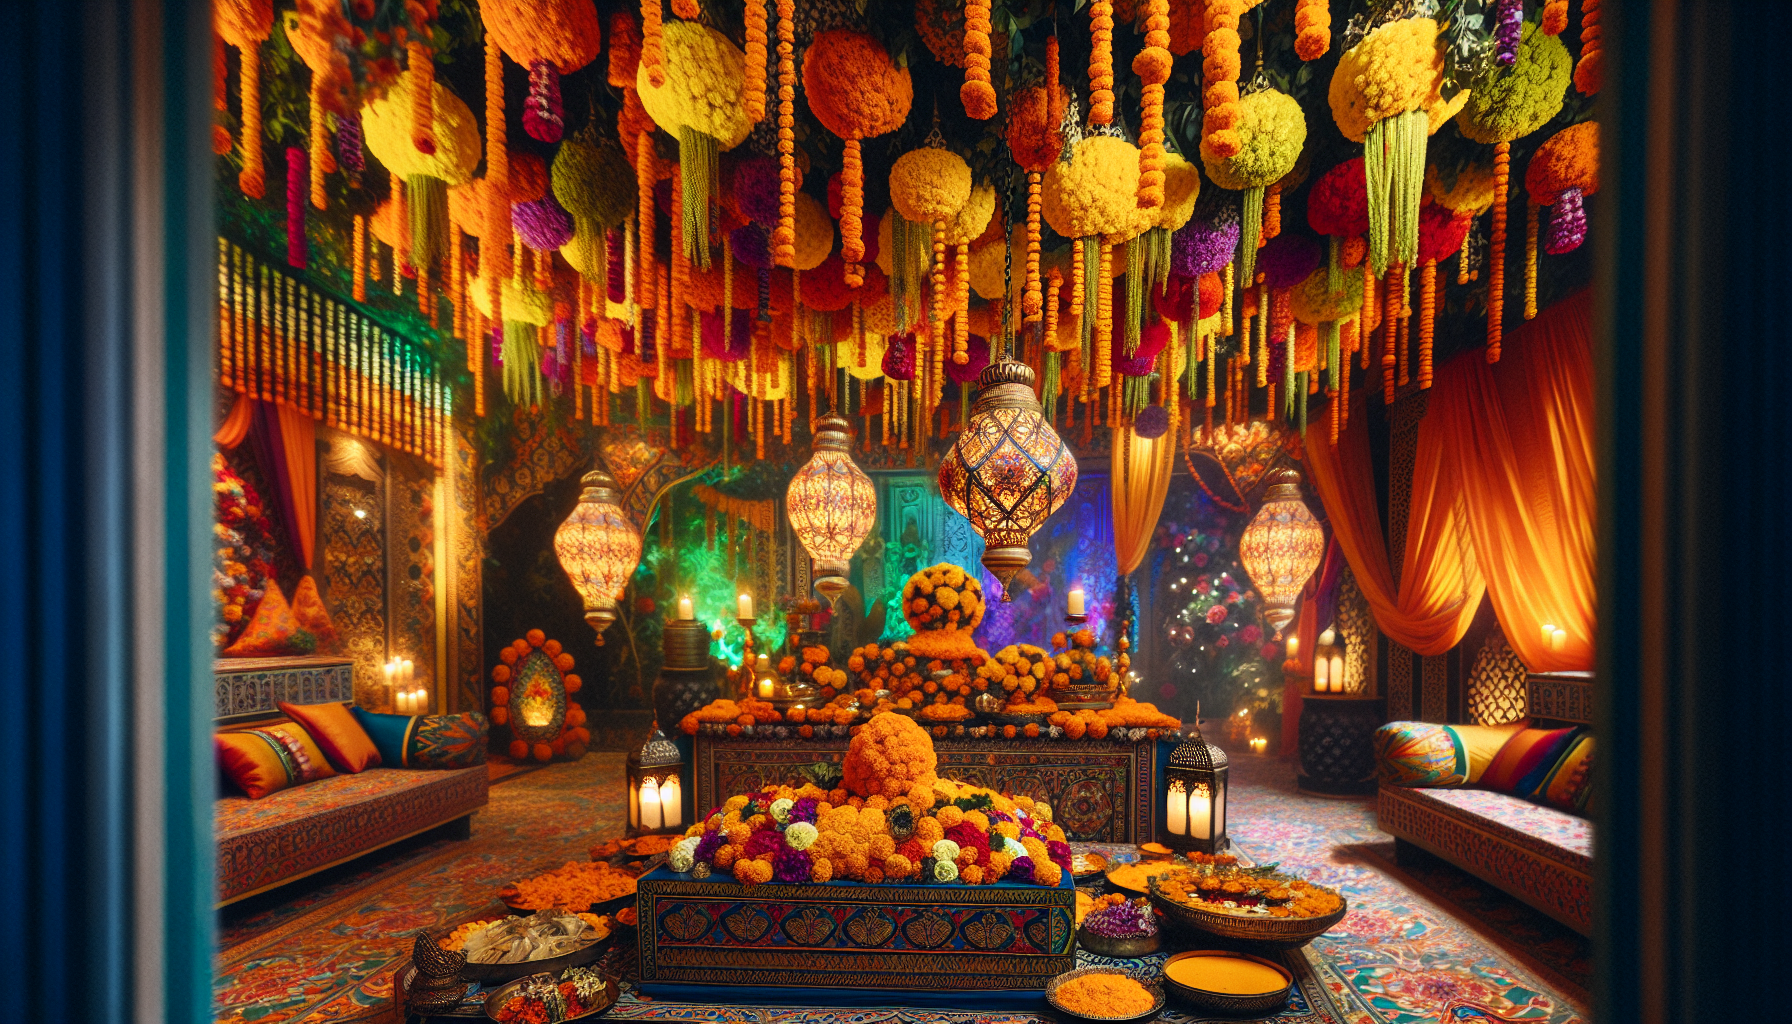 Colorful Indian-themed decor creating a vibrant atmosphere for the event